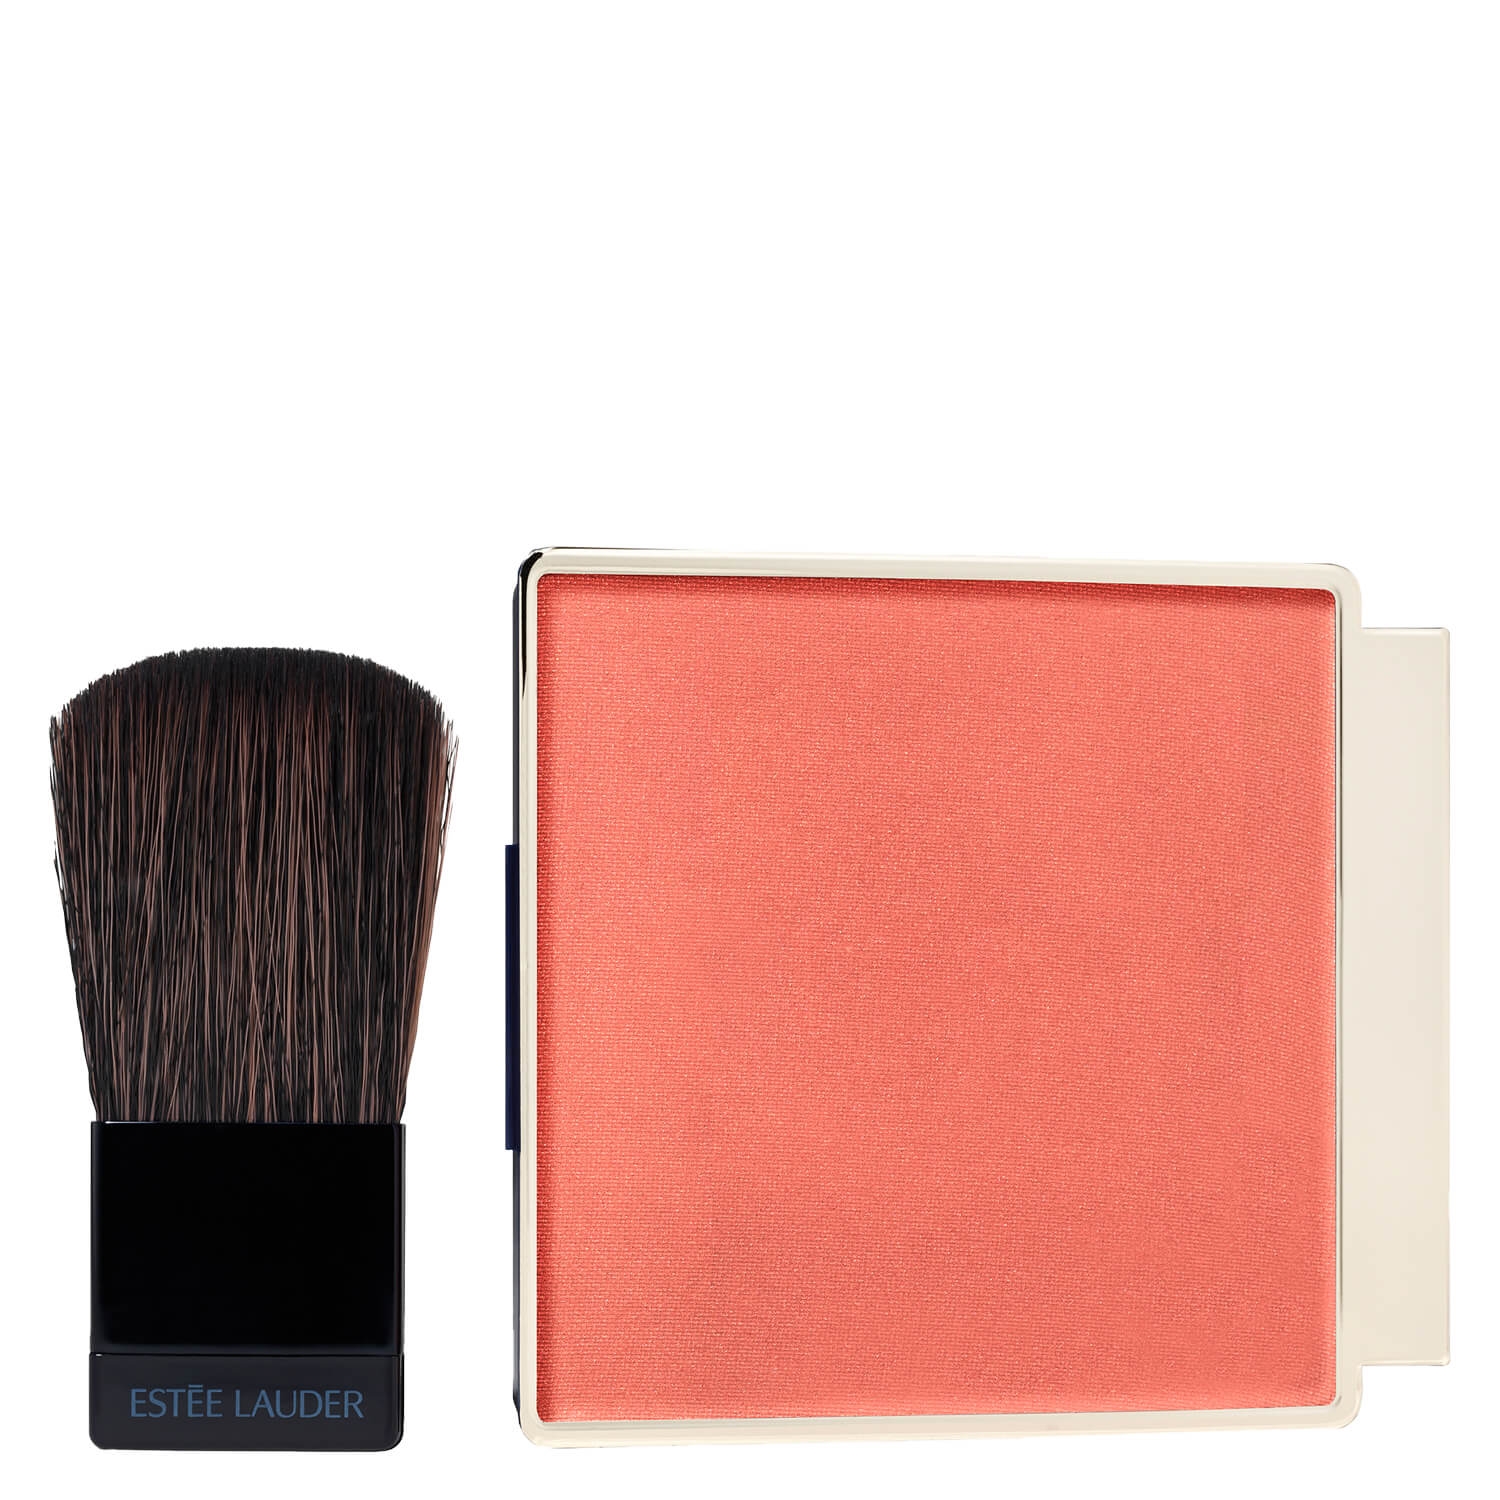 Product image from Pure Color Envy Sculpting Blush Wild Sunset 330 Refill